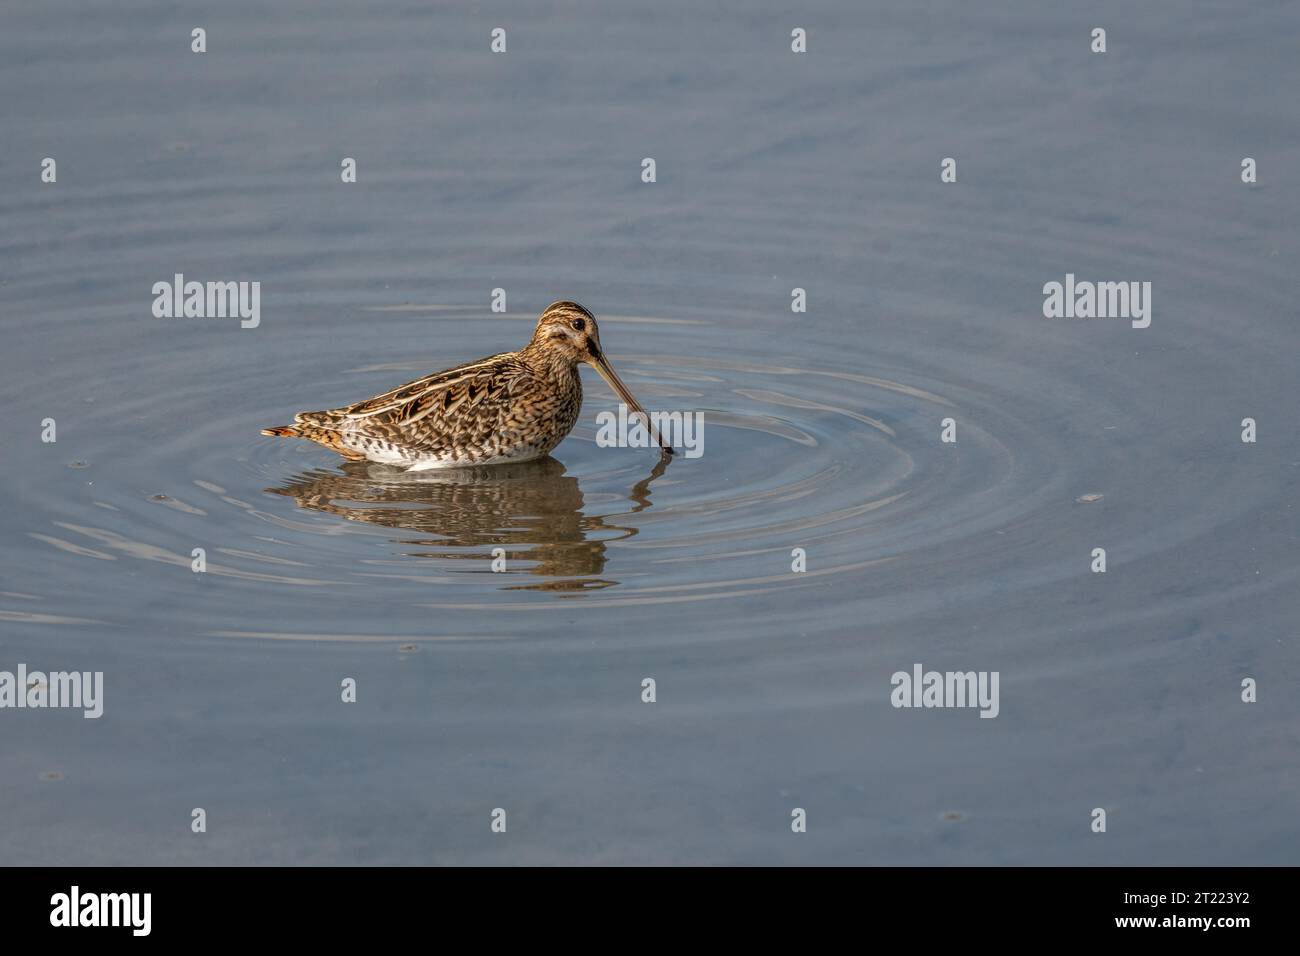 Common Snipe (Gallinago gallinago) searching for food in a marsh. Bas-Rhin, Collectivite europeenne d'Alsace,Grand Est, France, Europe. Stock Photo